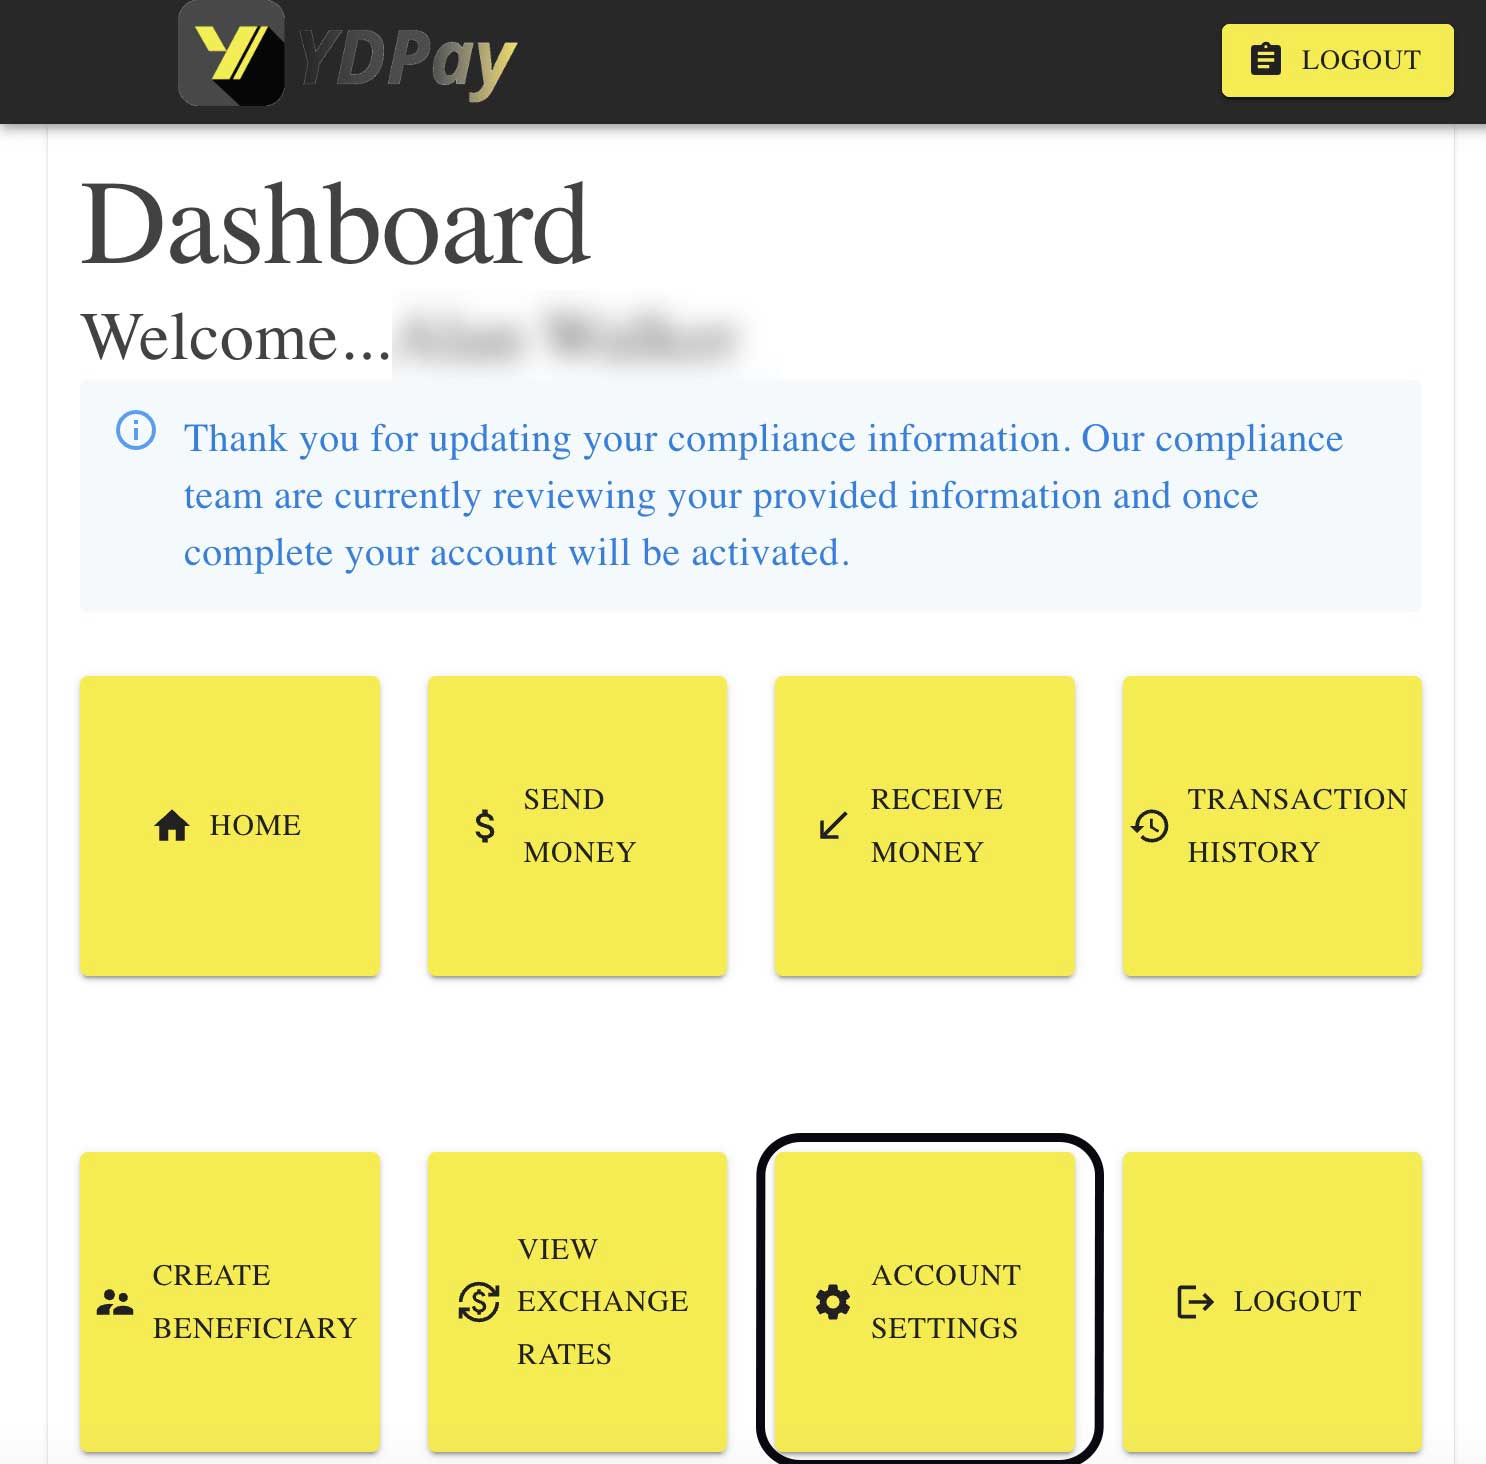 ydpay-account-settings